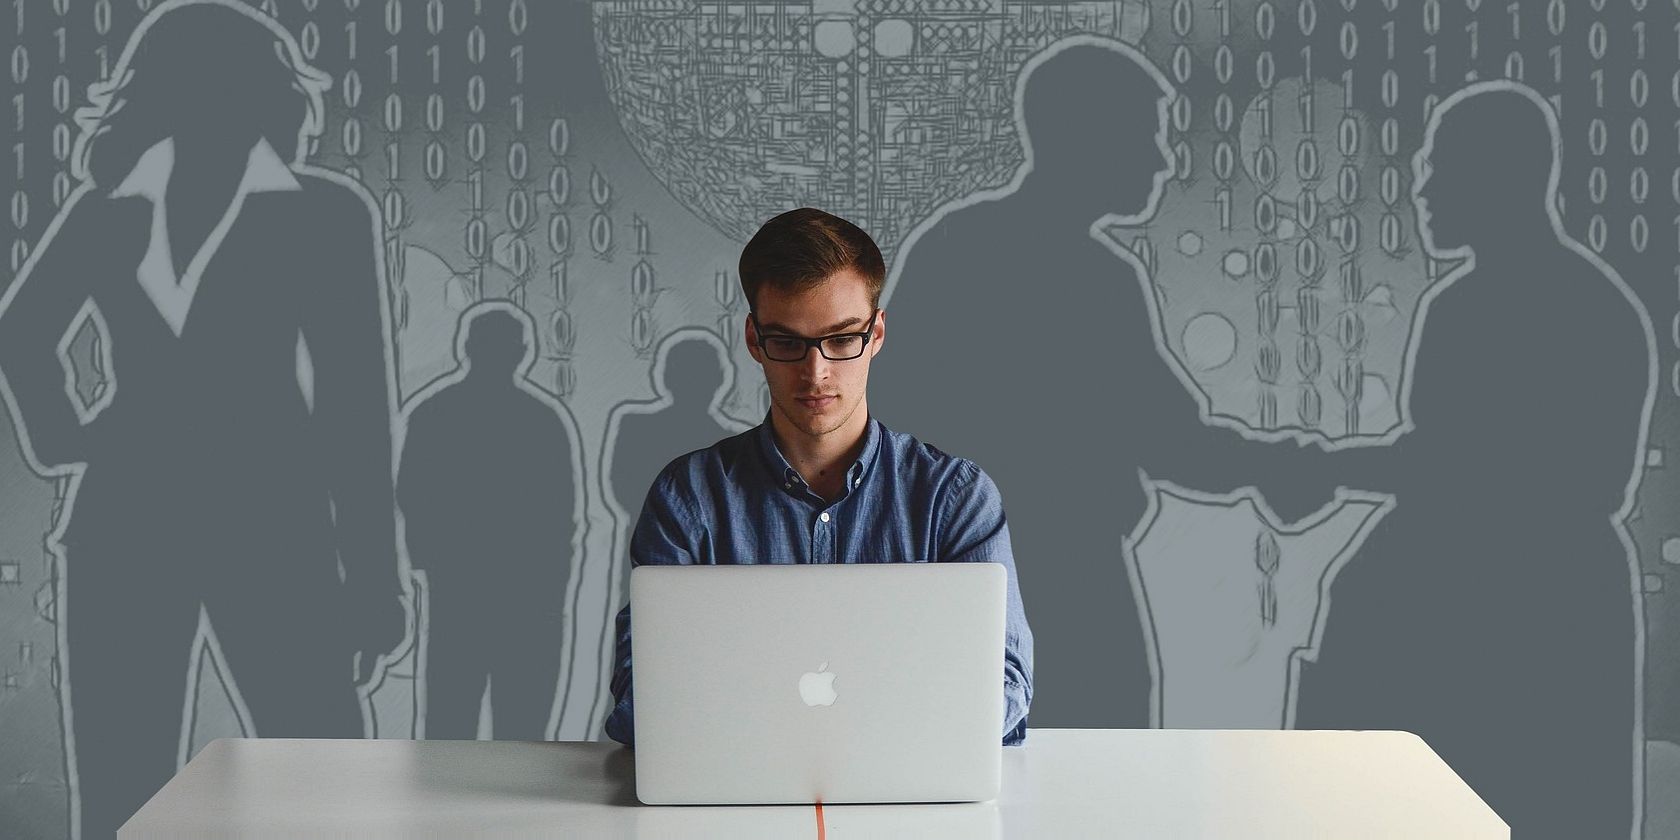 man working on his PC with background of people's shadows in business situations